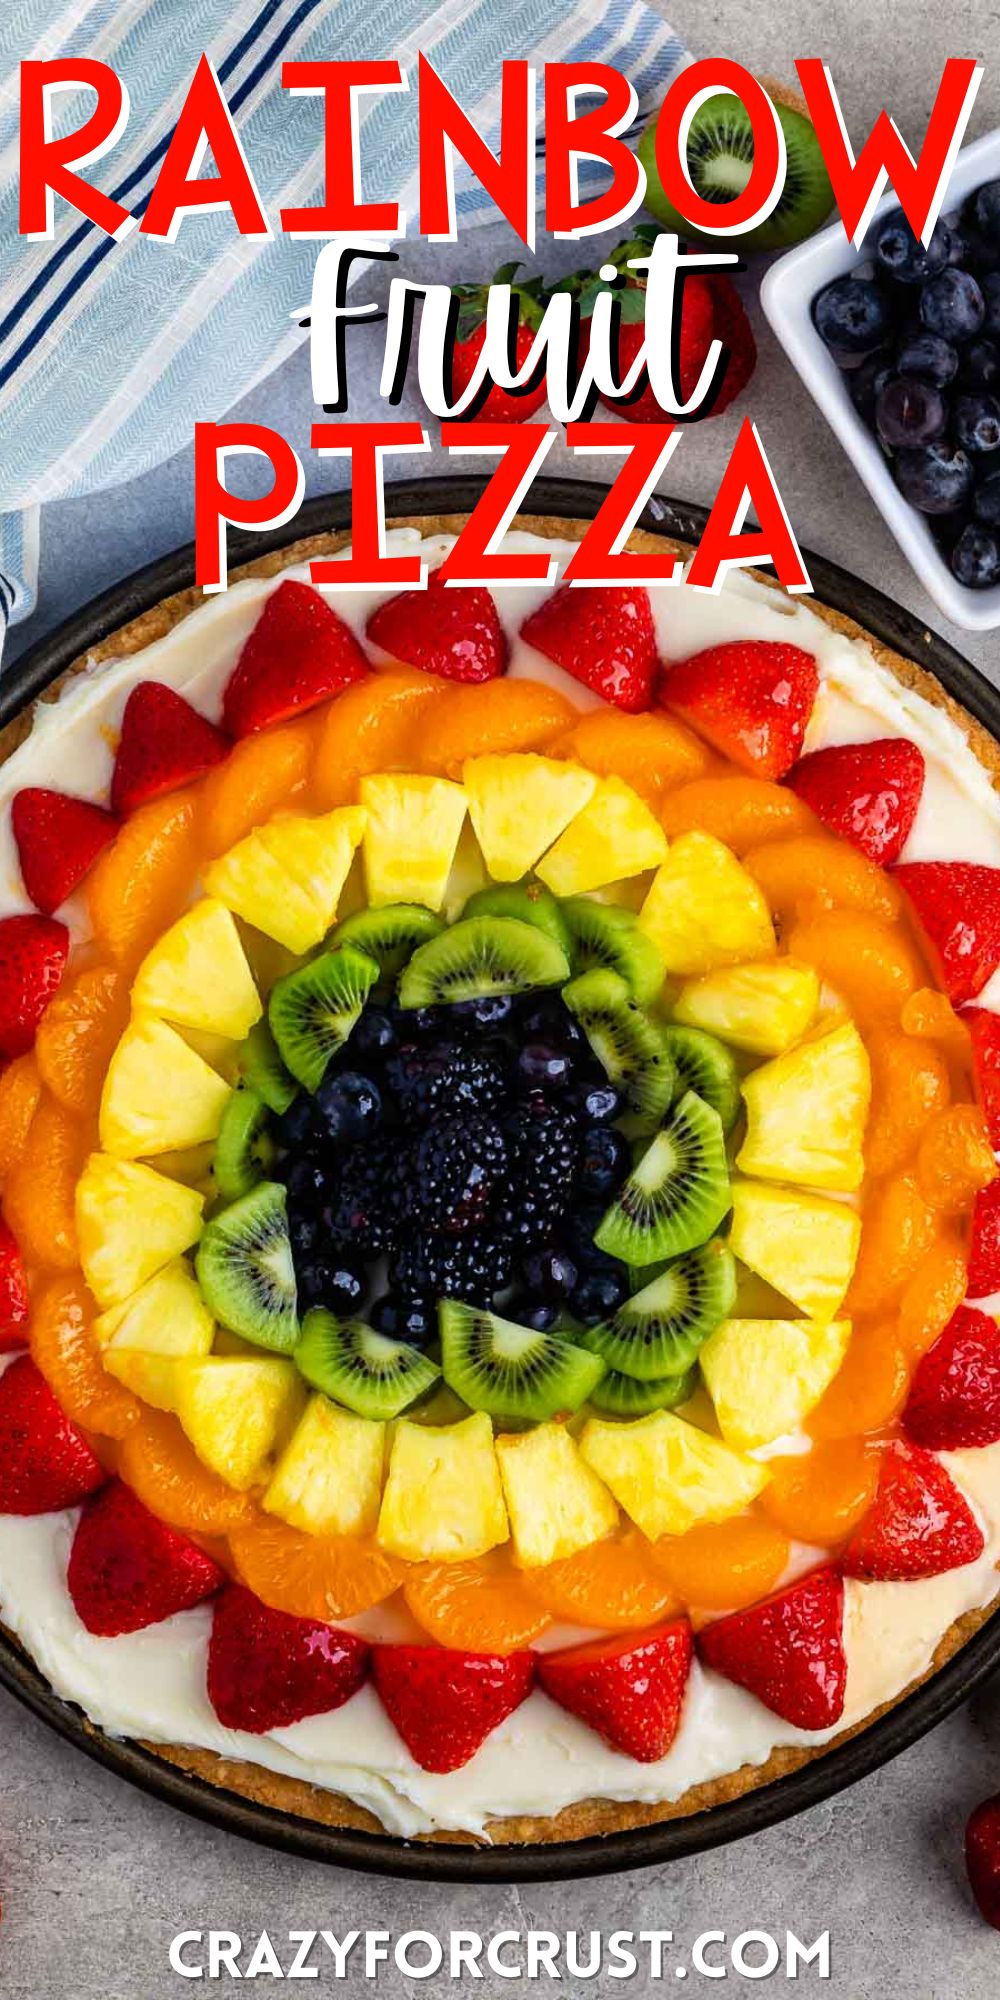 all types of fruit laid in rainbow order on a circular piece of dough with words on the image.